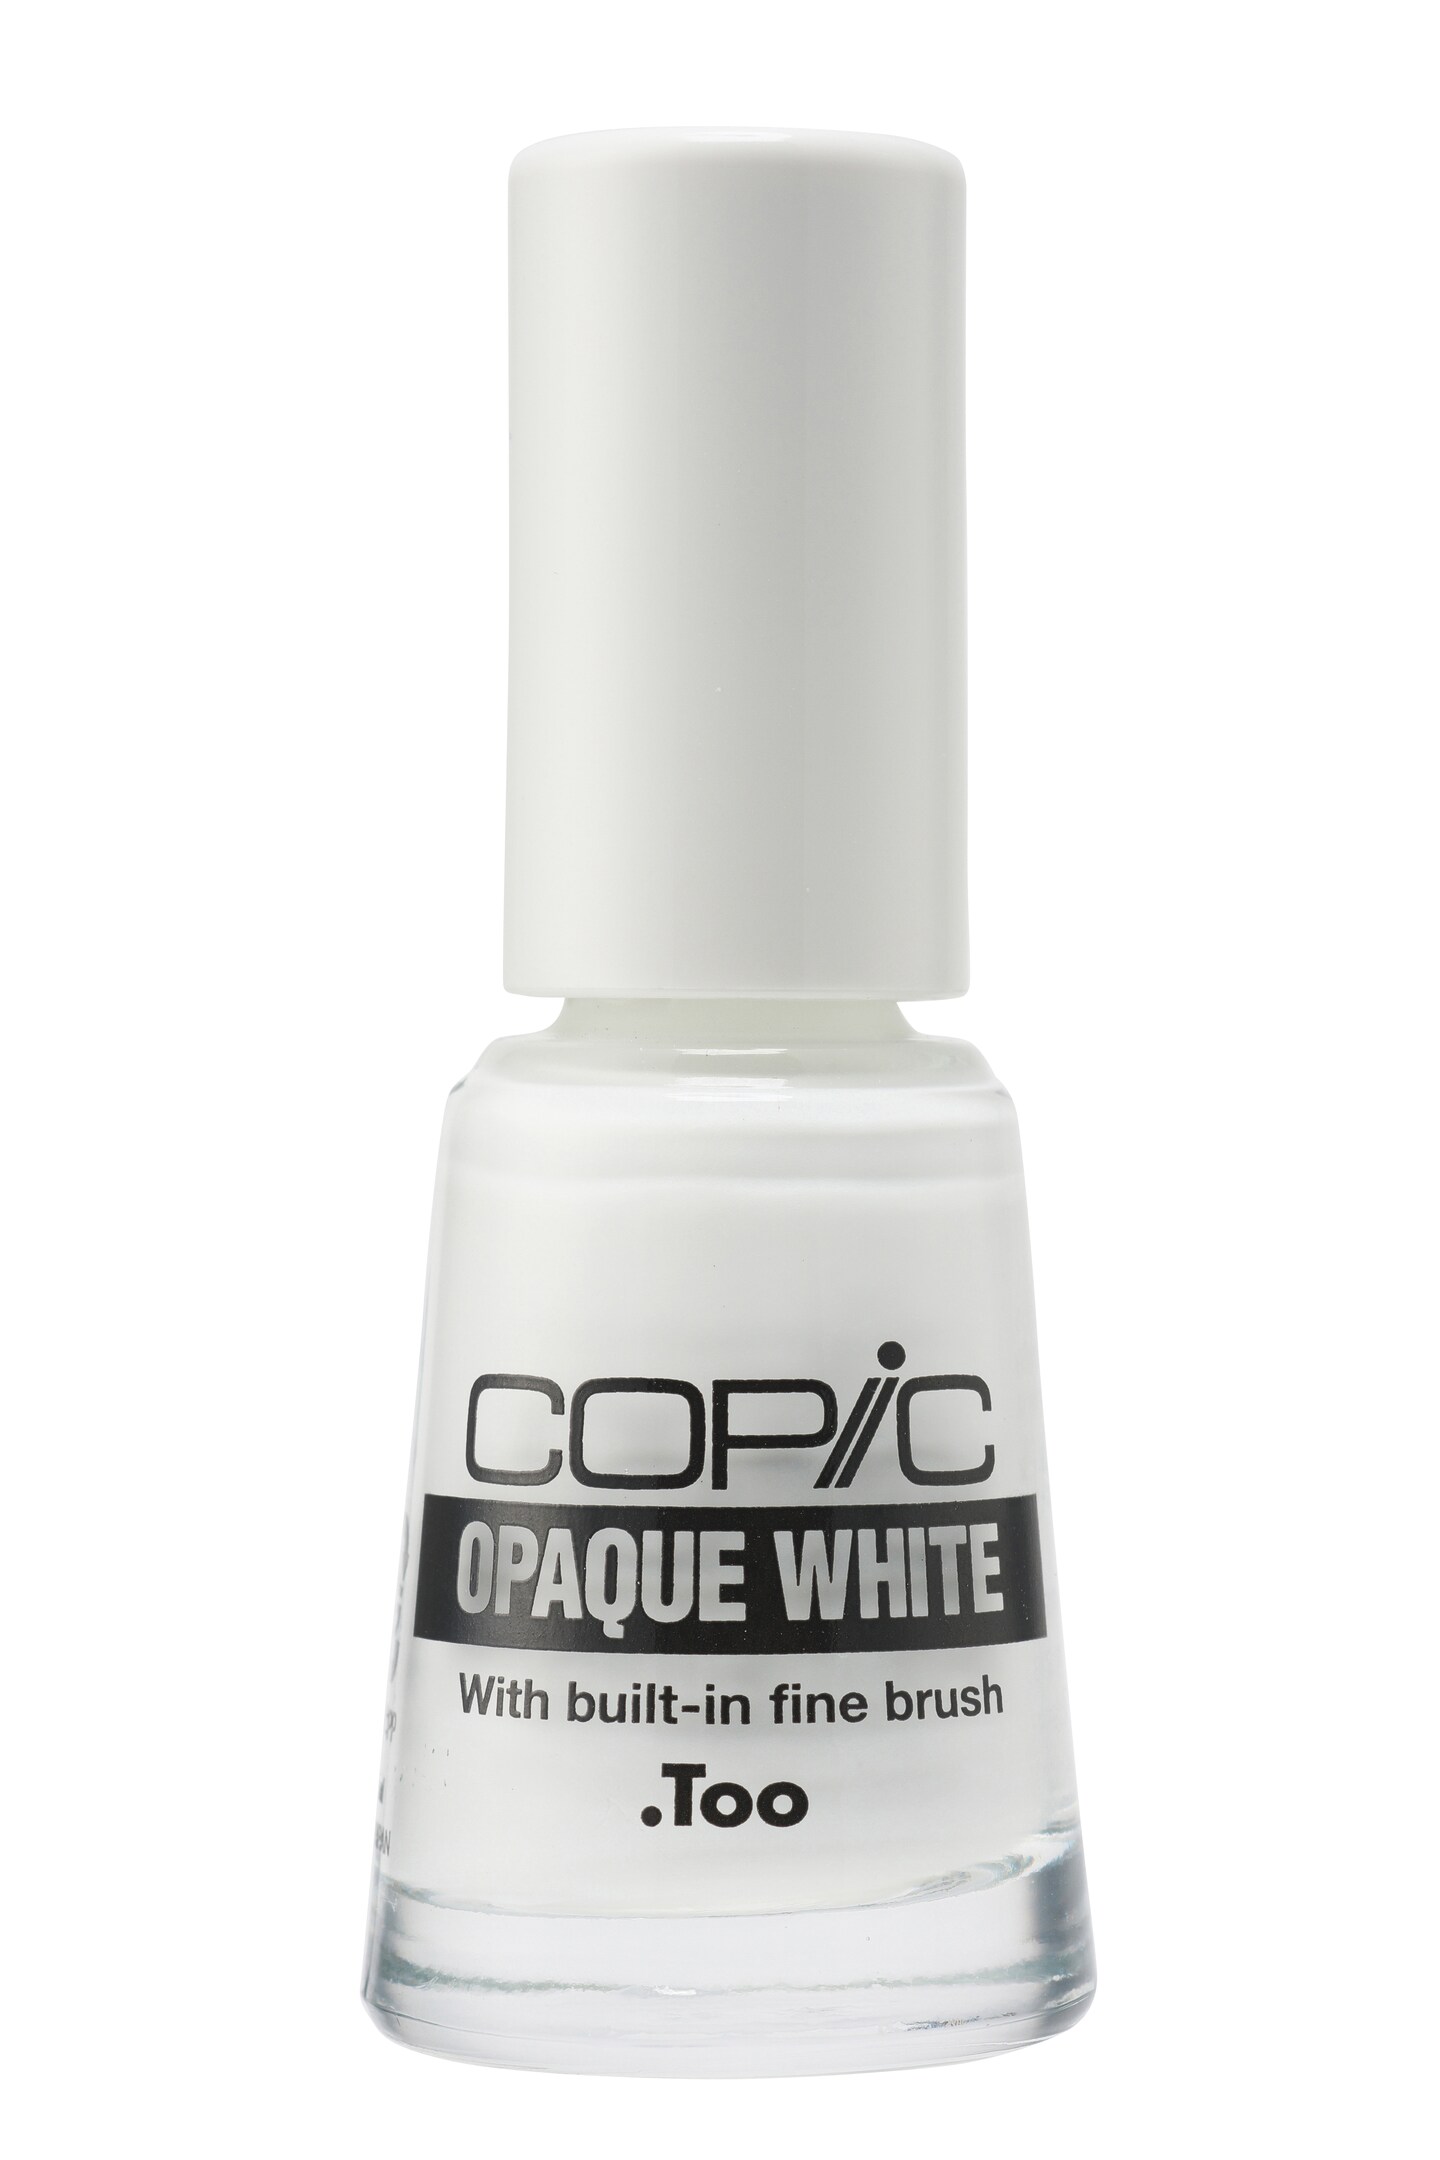 Copic Opaque White Pigment With Brush